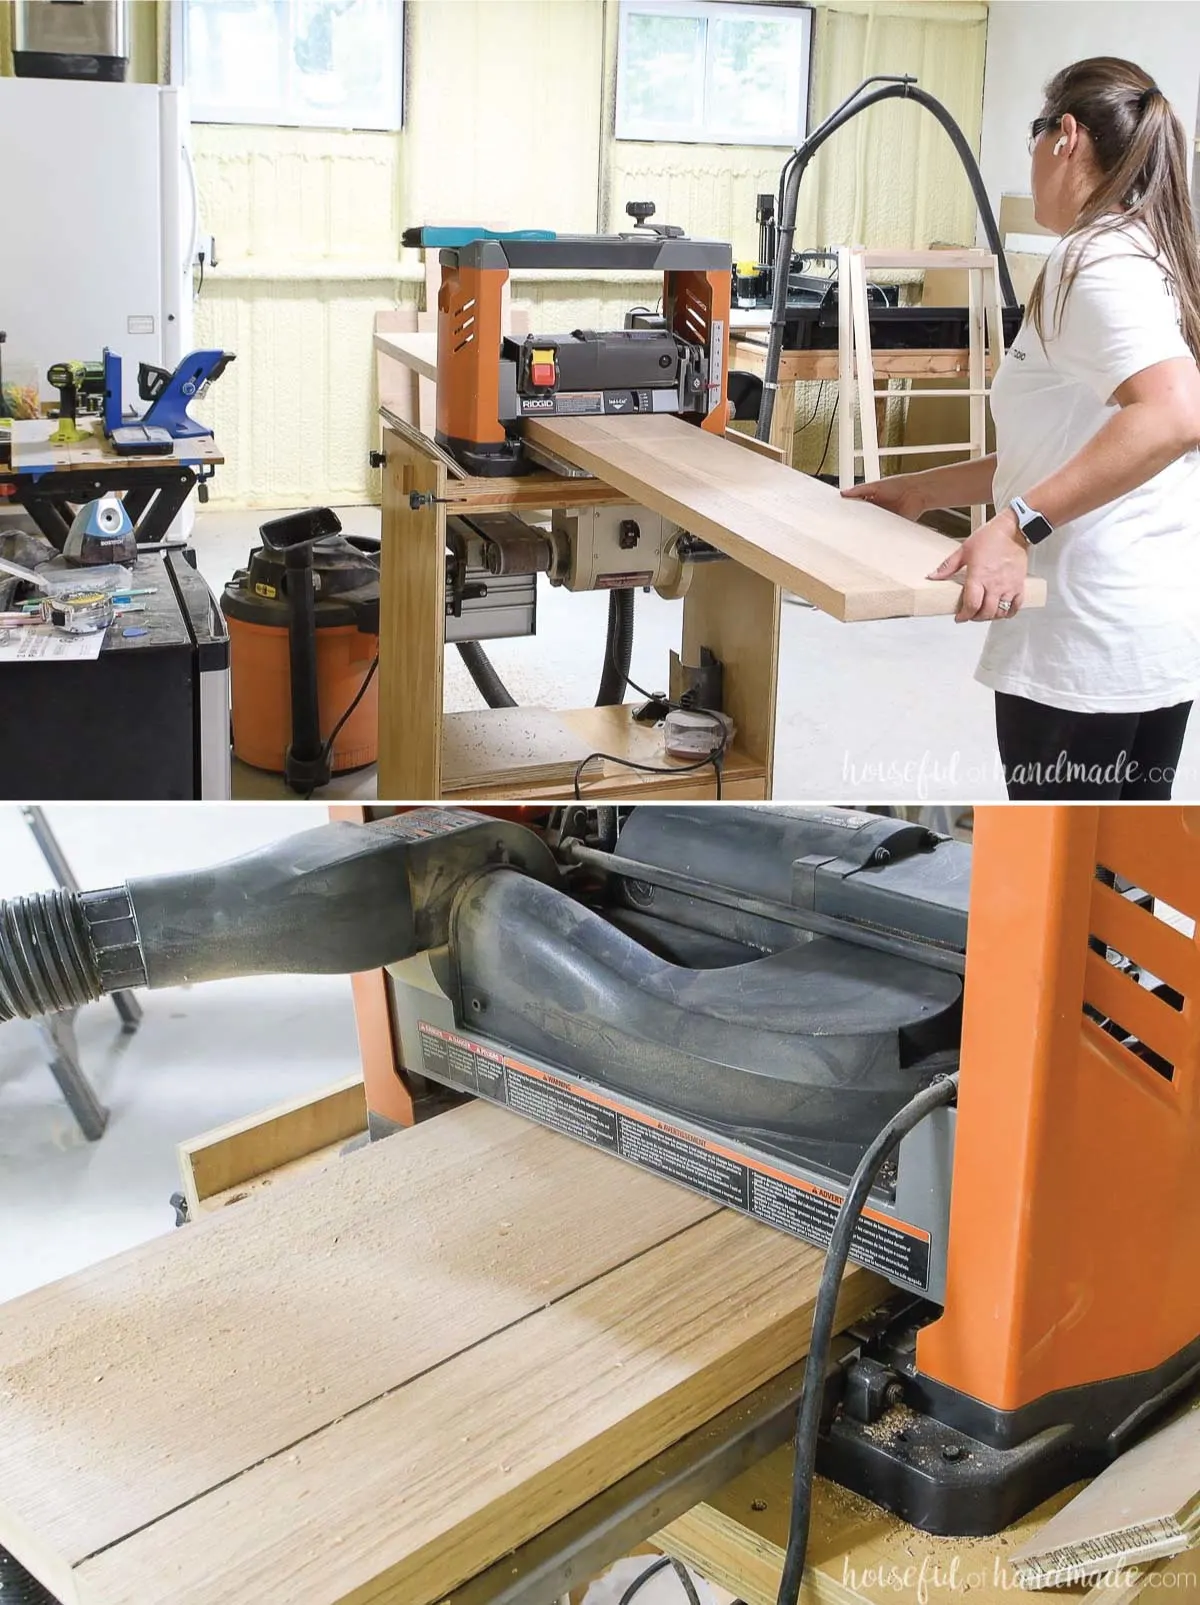 Running 12" wide oak boards through a Ridgid planer to refinish the table top. 